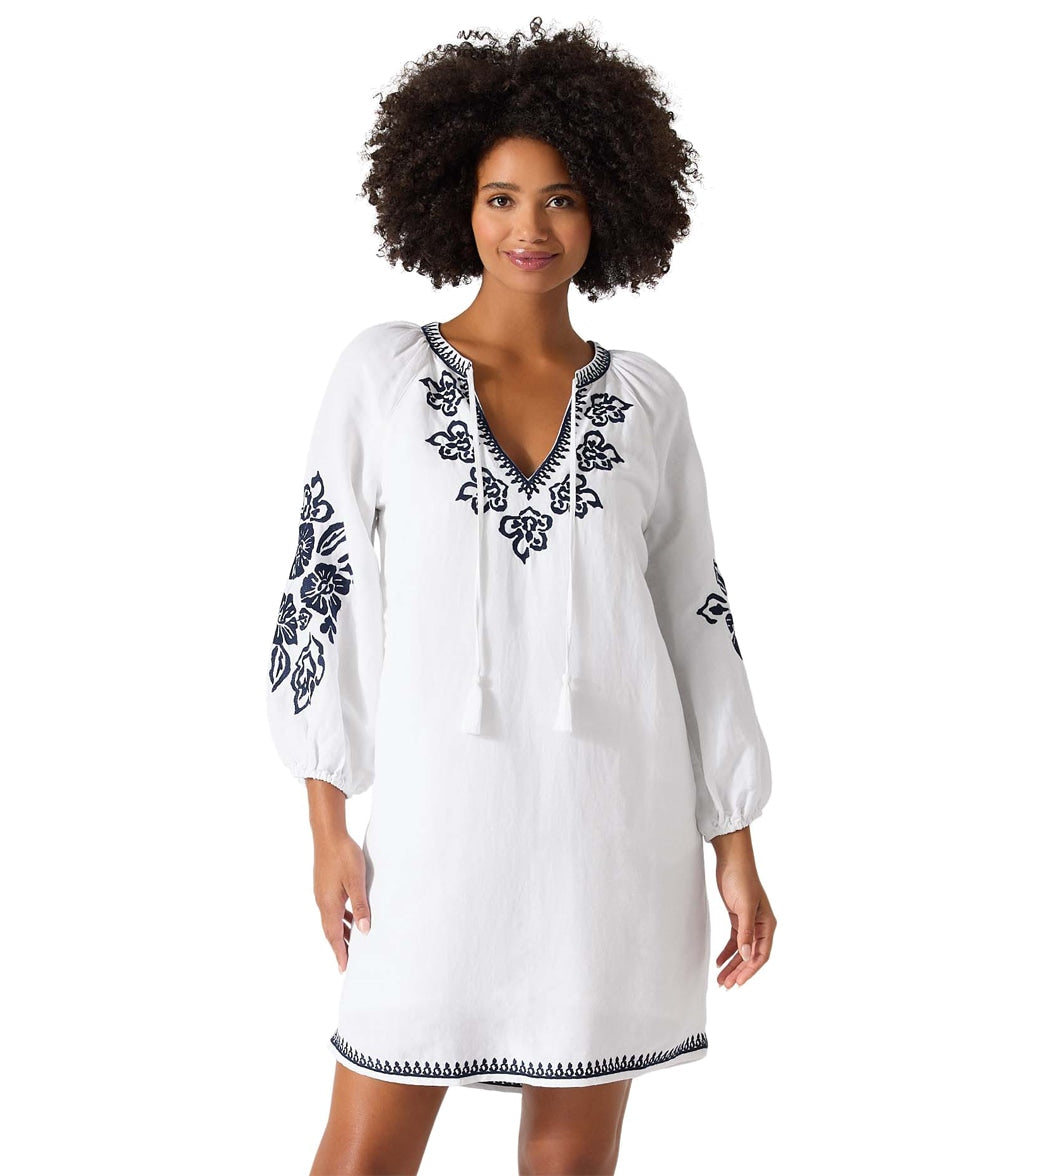 Tommy Bahama St Lucia Embroidered Tunic Cover Up Dress at SwimOutlet.com